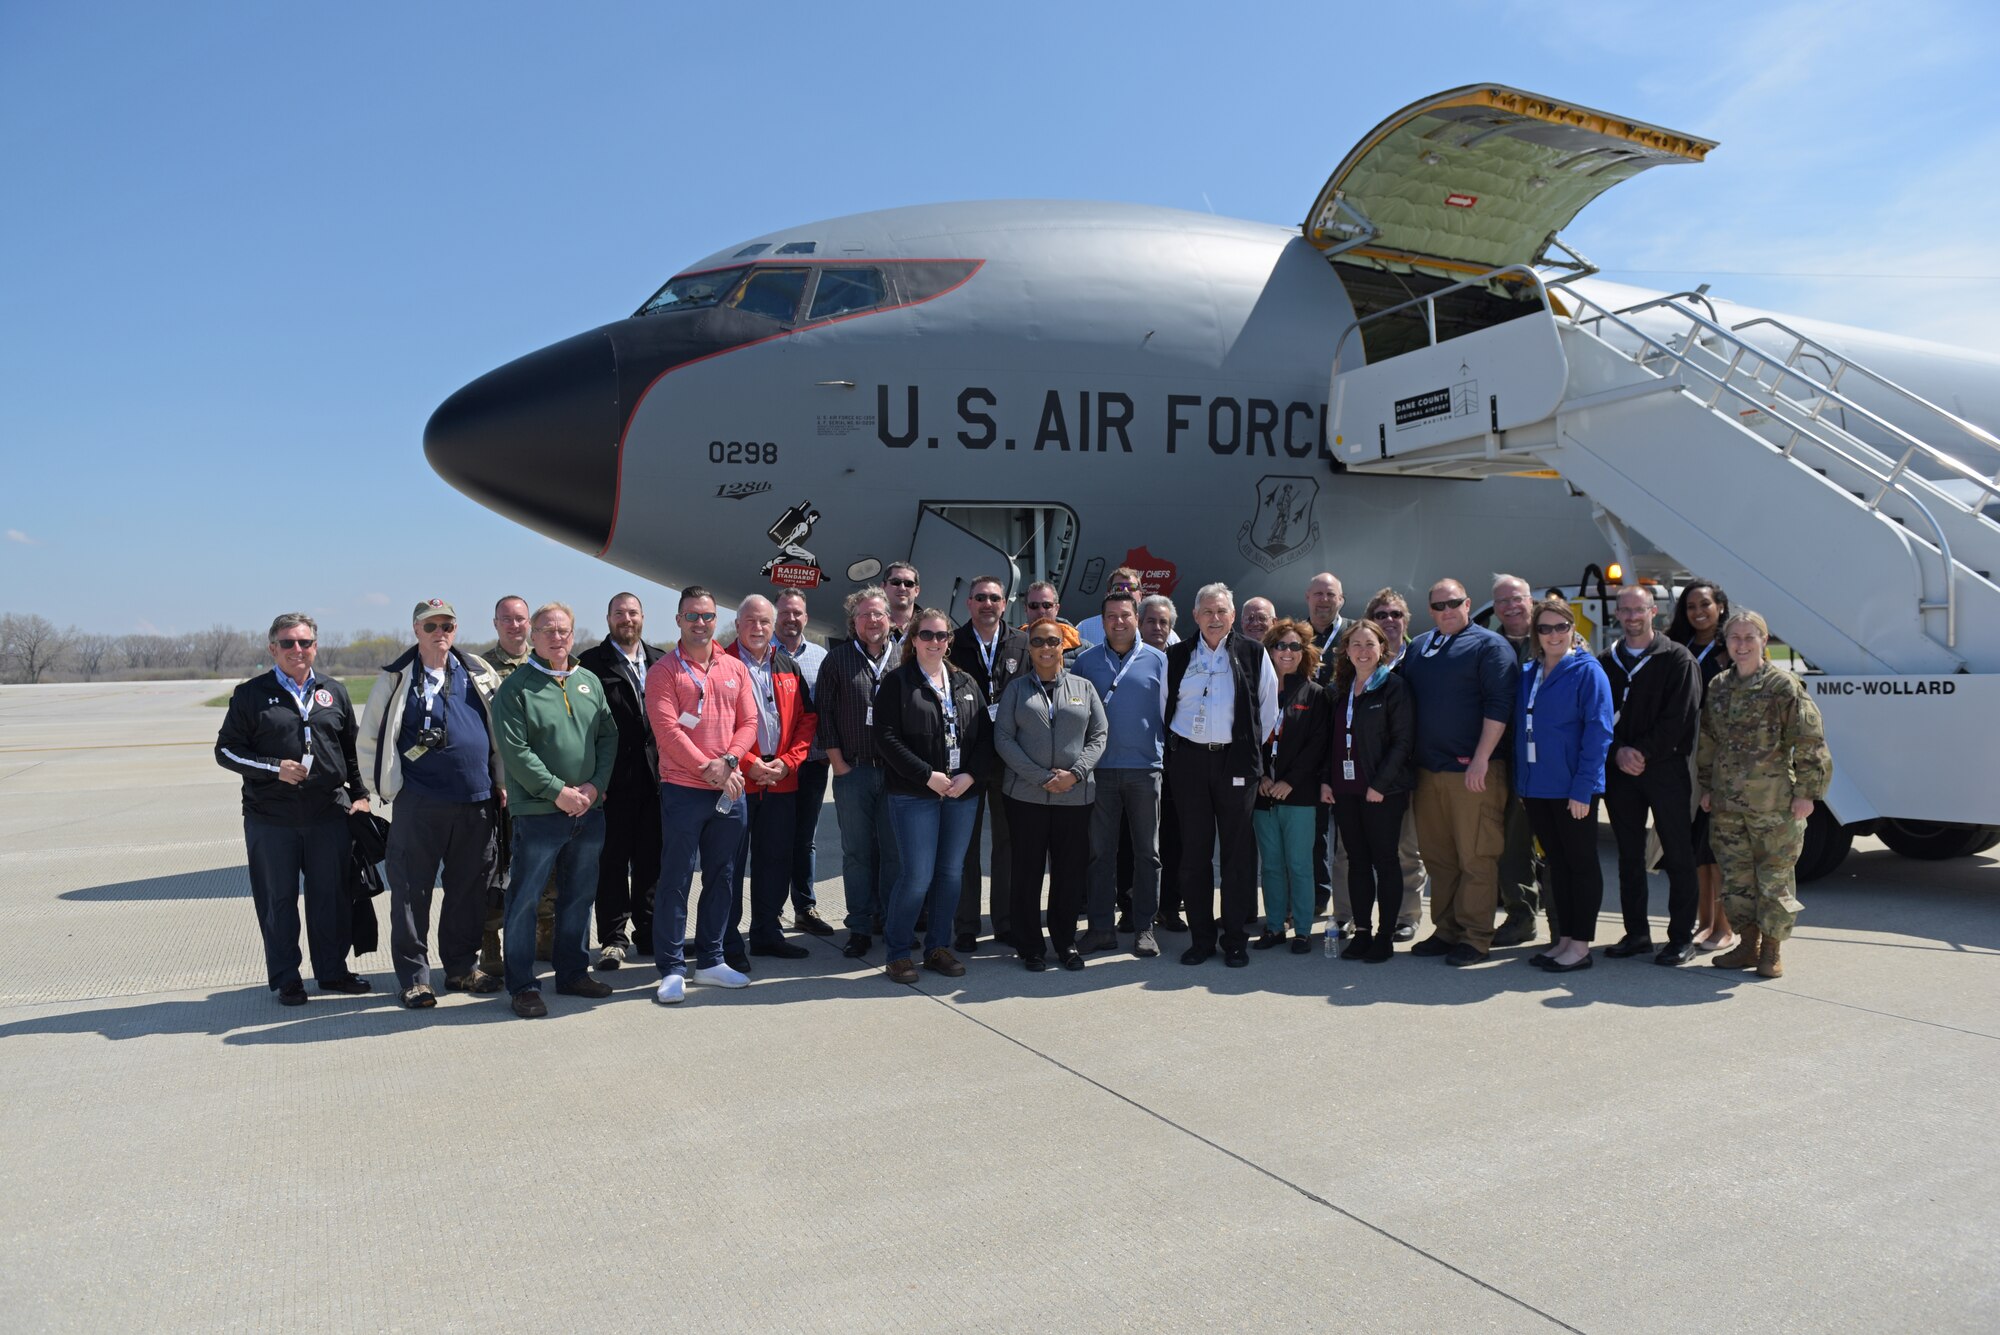 Employers submitted to attend a Madison Boss Lift pose for a group photo in front of a 128th Air Refueling Wing Boeing KC-135 Stratotanker. A group of approximately 20 employers attended the Madison Boss Lift, hosted by Wisconsin Employer Support of the Guard and Reserve Wednesday April, 24 2019 at Truax Field, Madison Wisconsin. (U.S. Air National Guard photo by Tech. Sgt. Mary Greenwood)